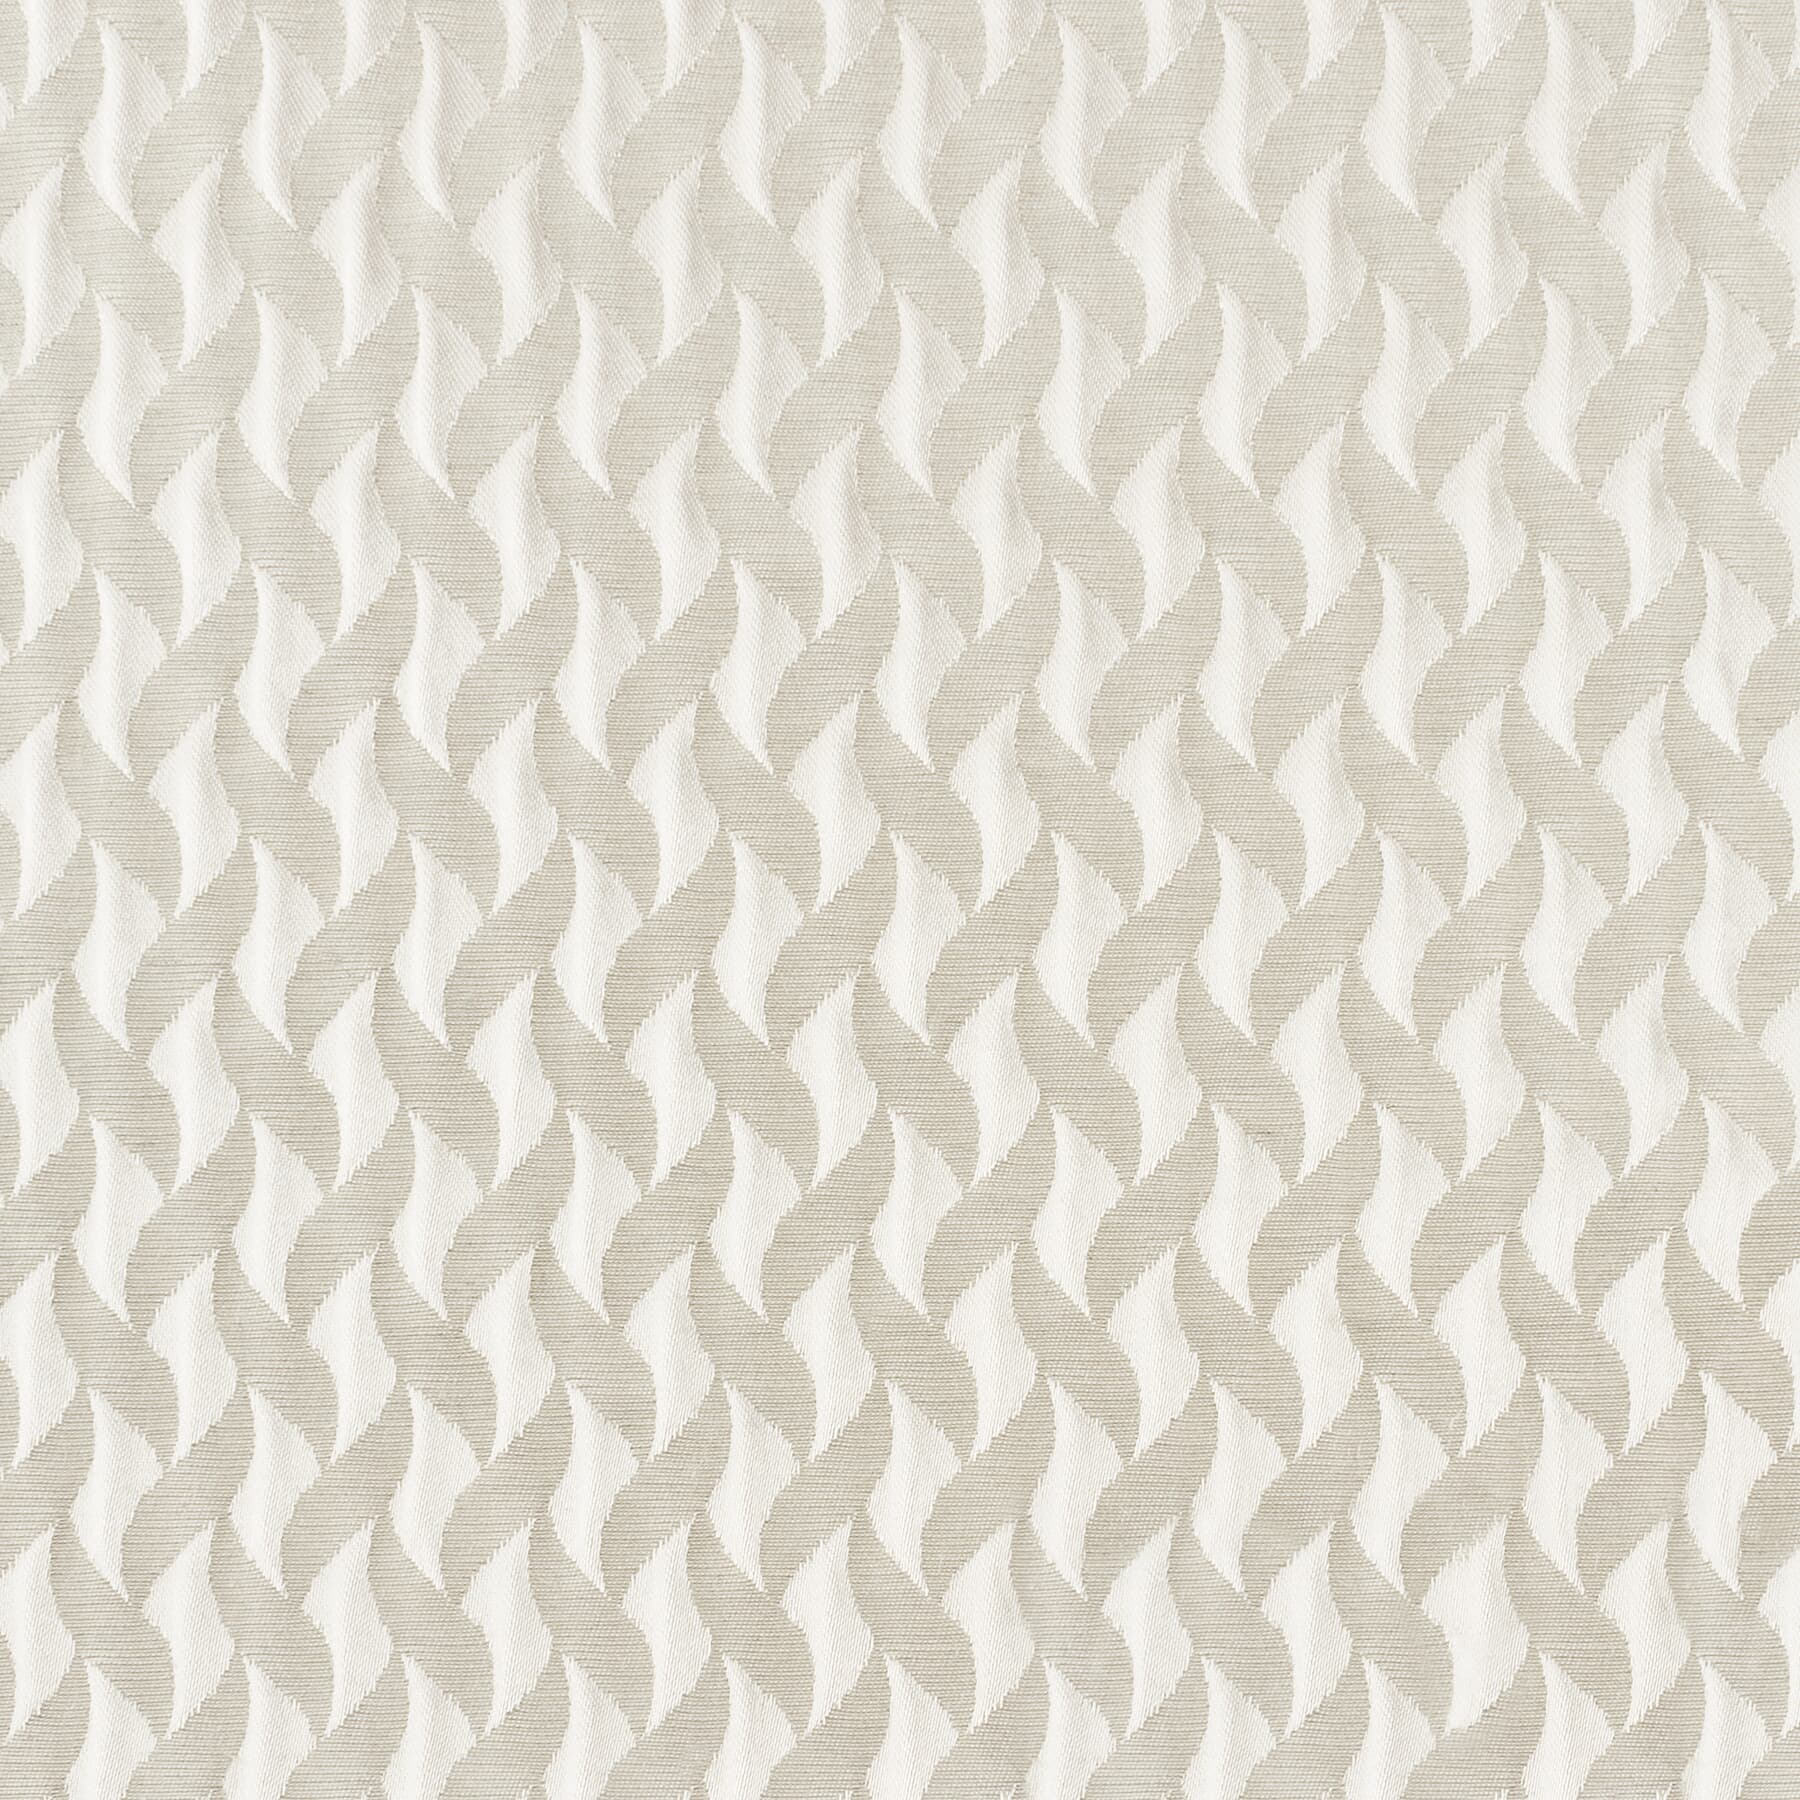 Hinsdale 3 Silver by Stout Fabric